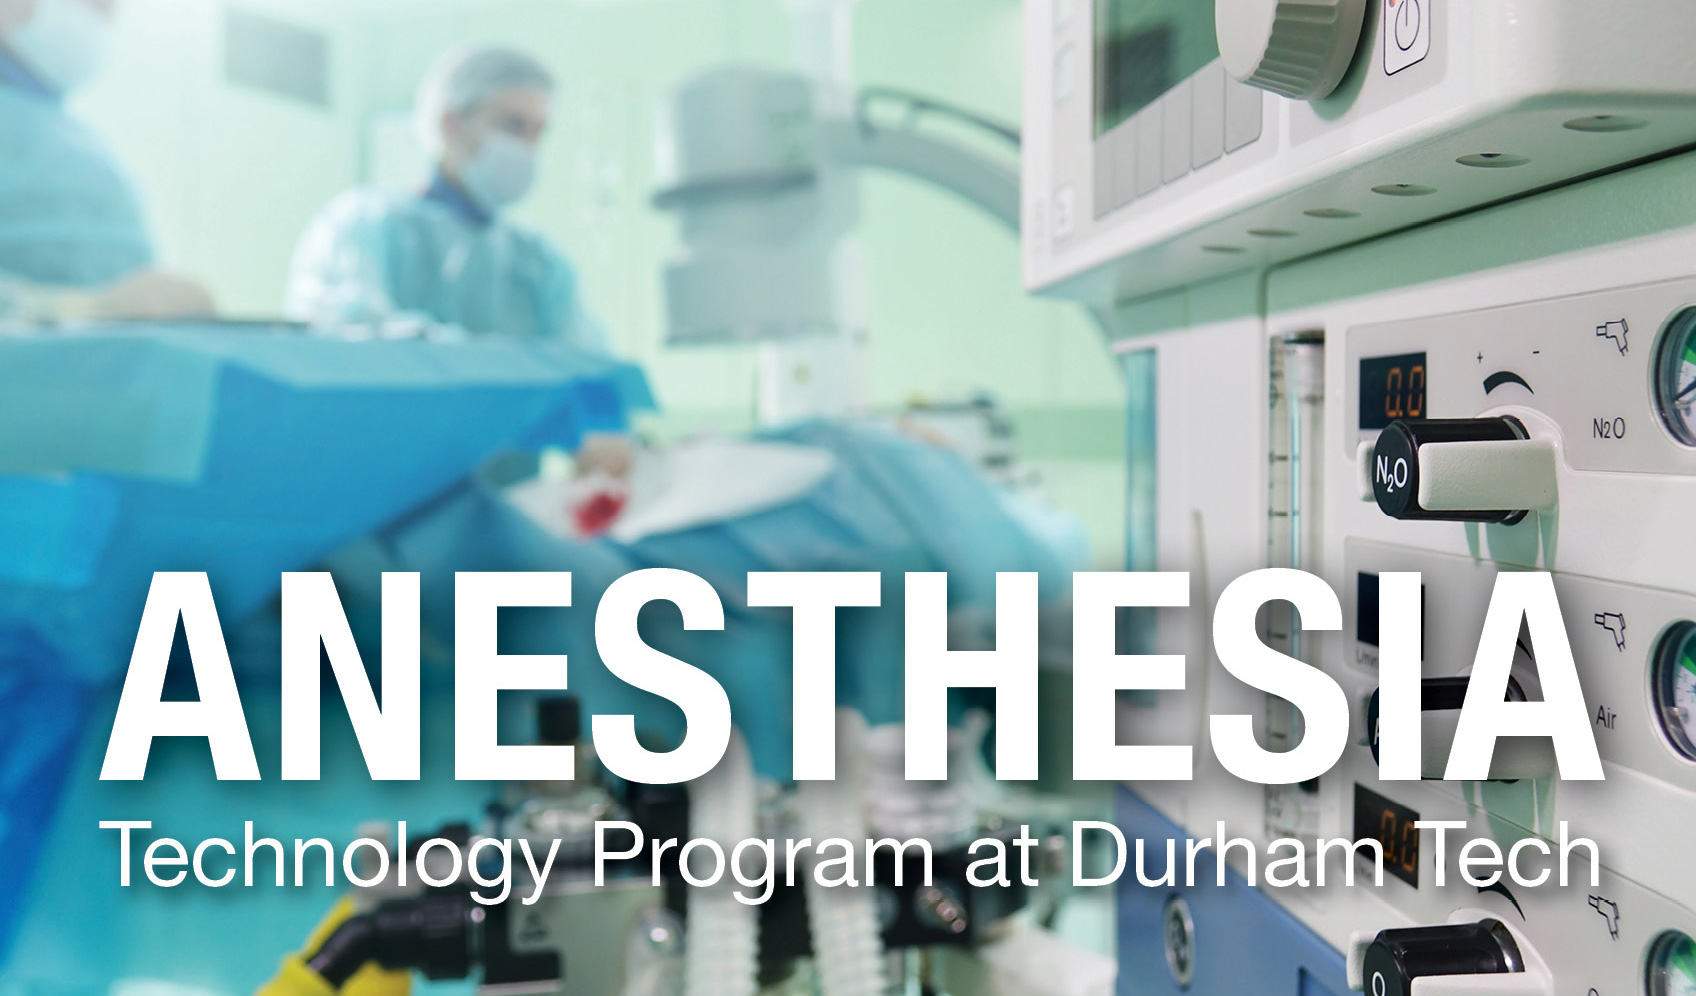 photo of operating room with text that says anesthesia technology program at durham tech